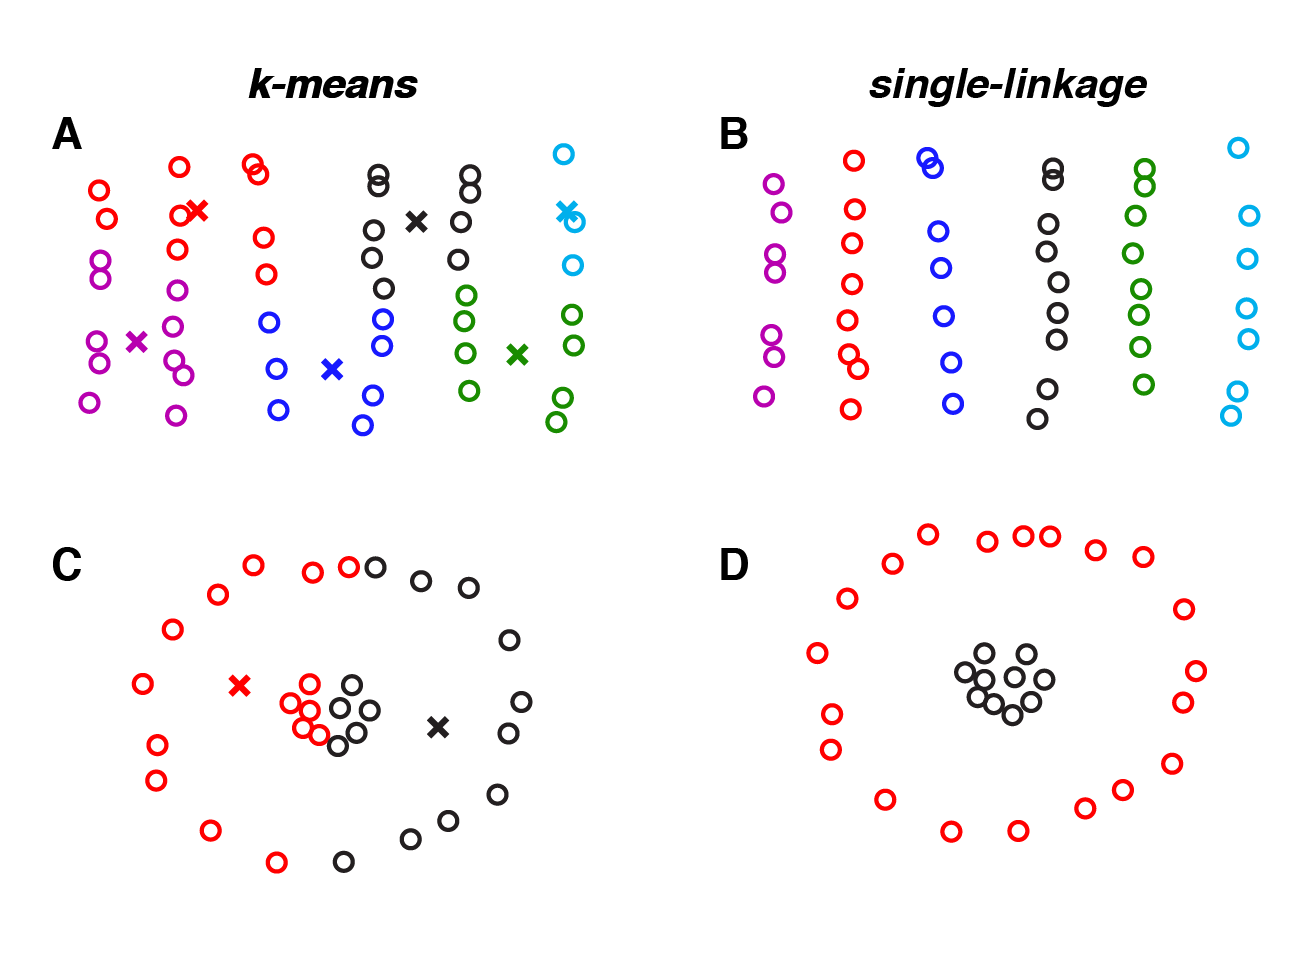 If your dataset contains long paths, then single-linkage clustering (panels B and D) will typically perform better than k-means (panels A and C).